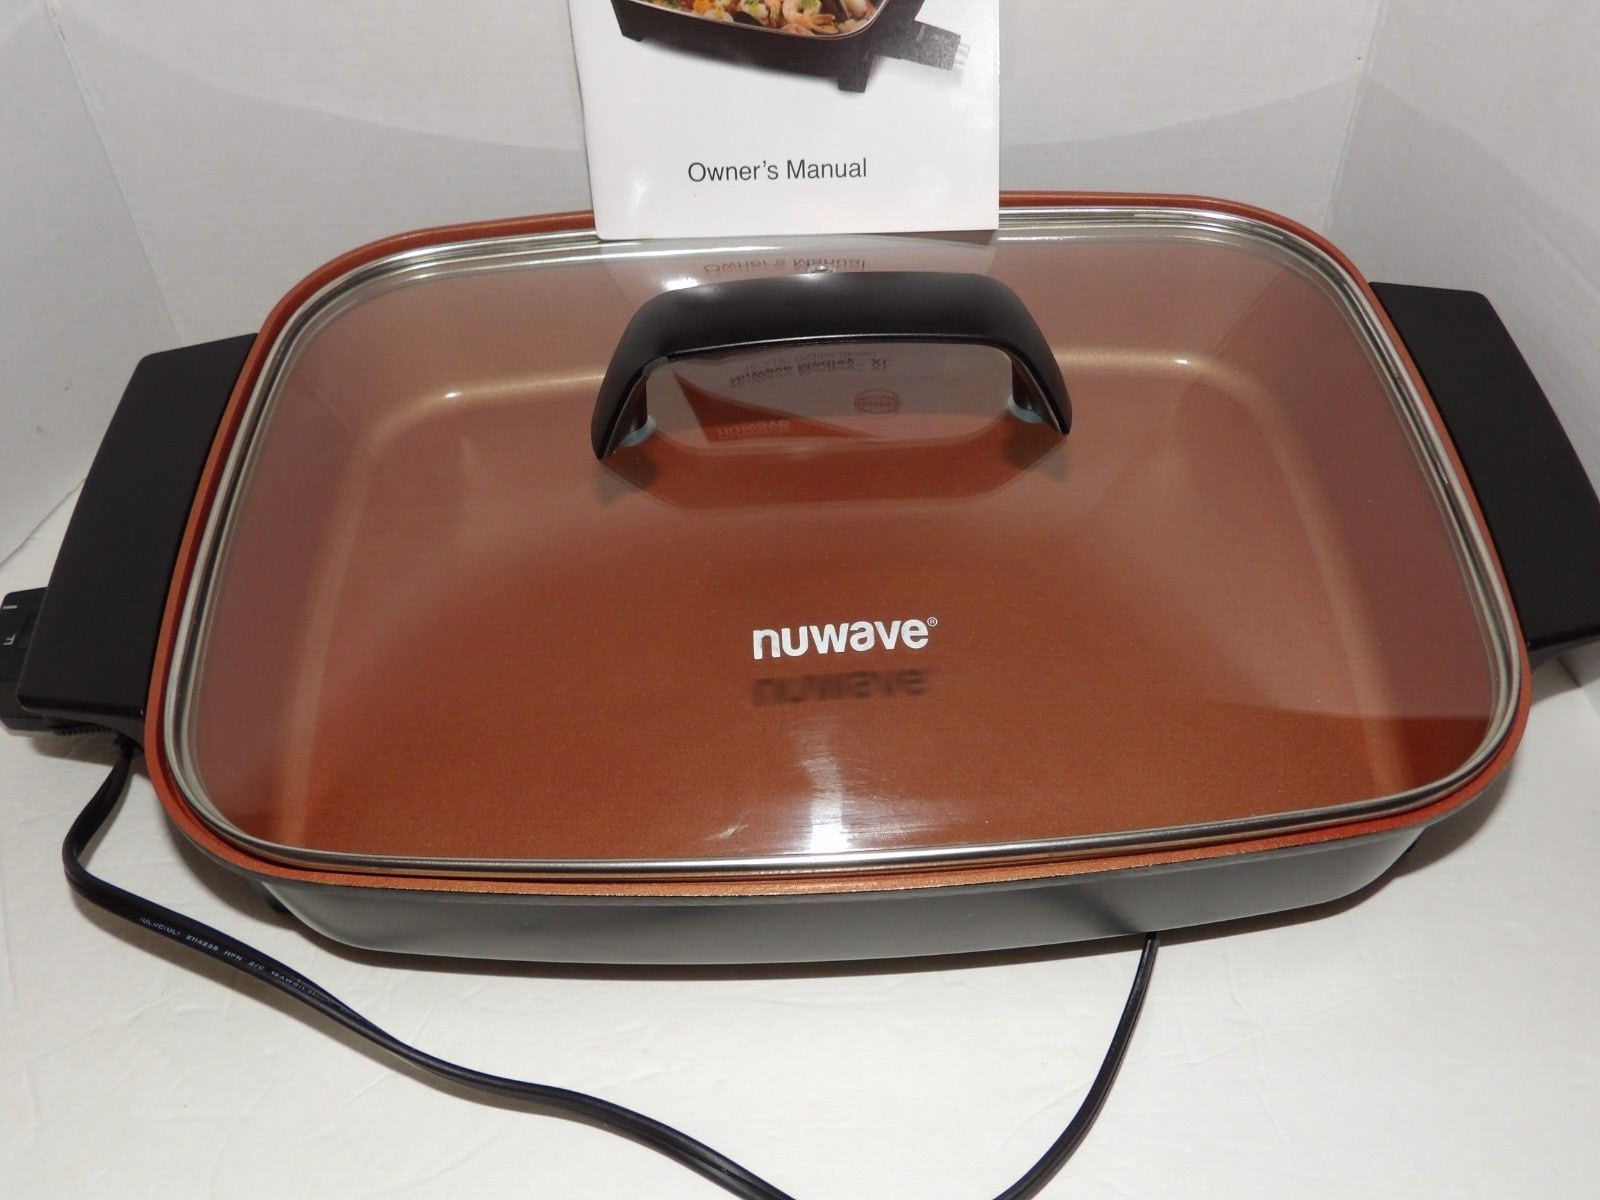 Copper Chef Coated DEEP Pan / Steamer - household items - by owner -  housewares sale - craigslist